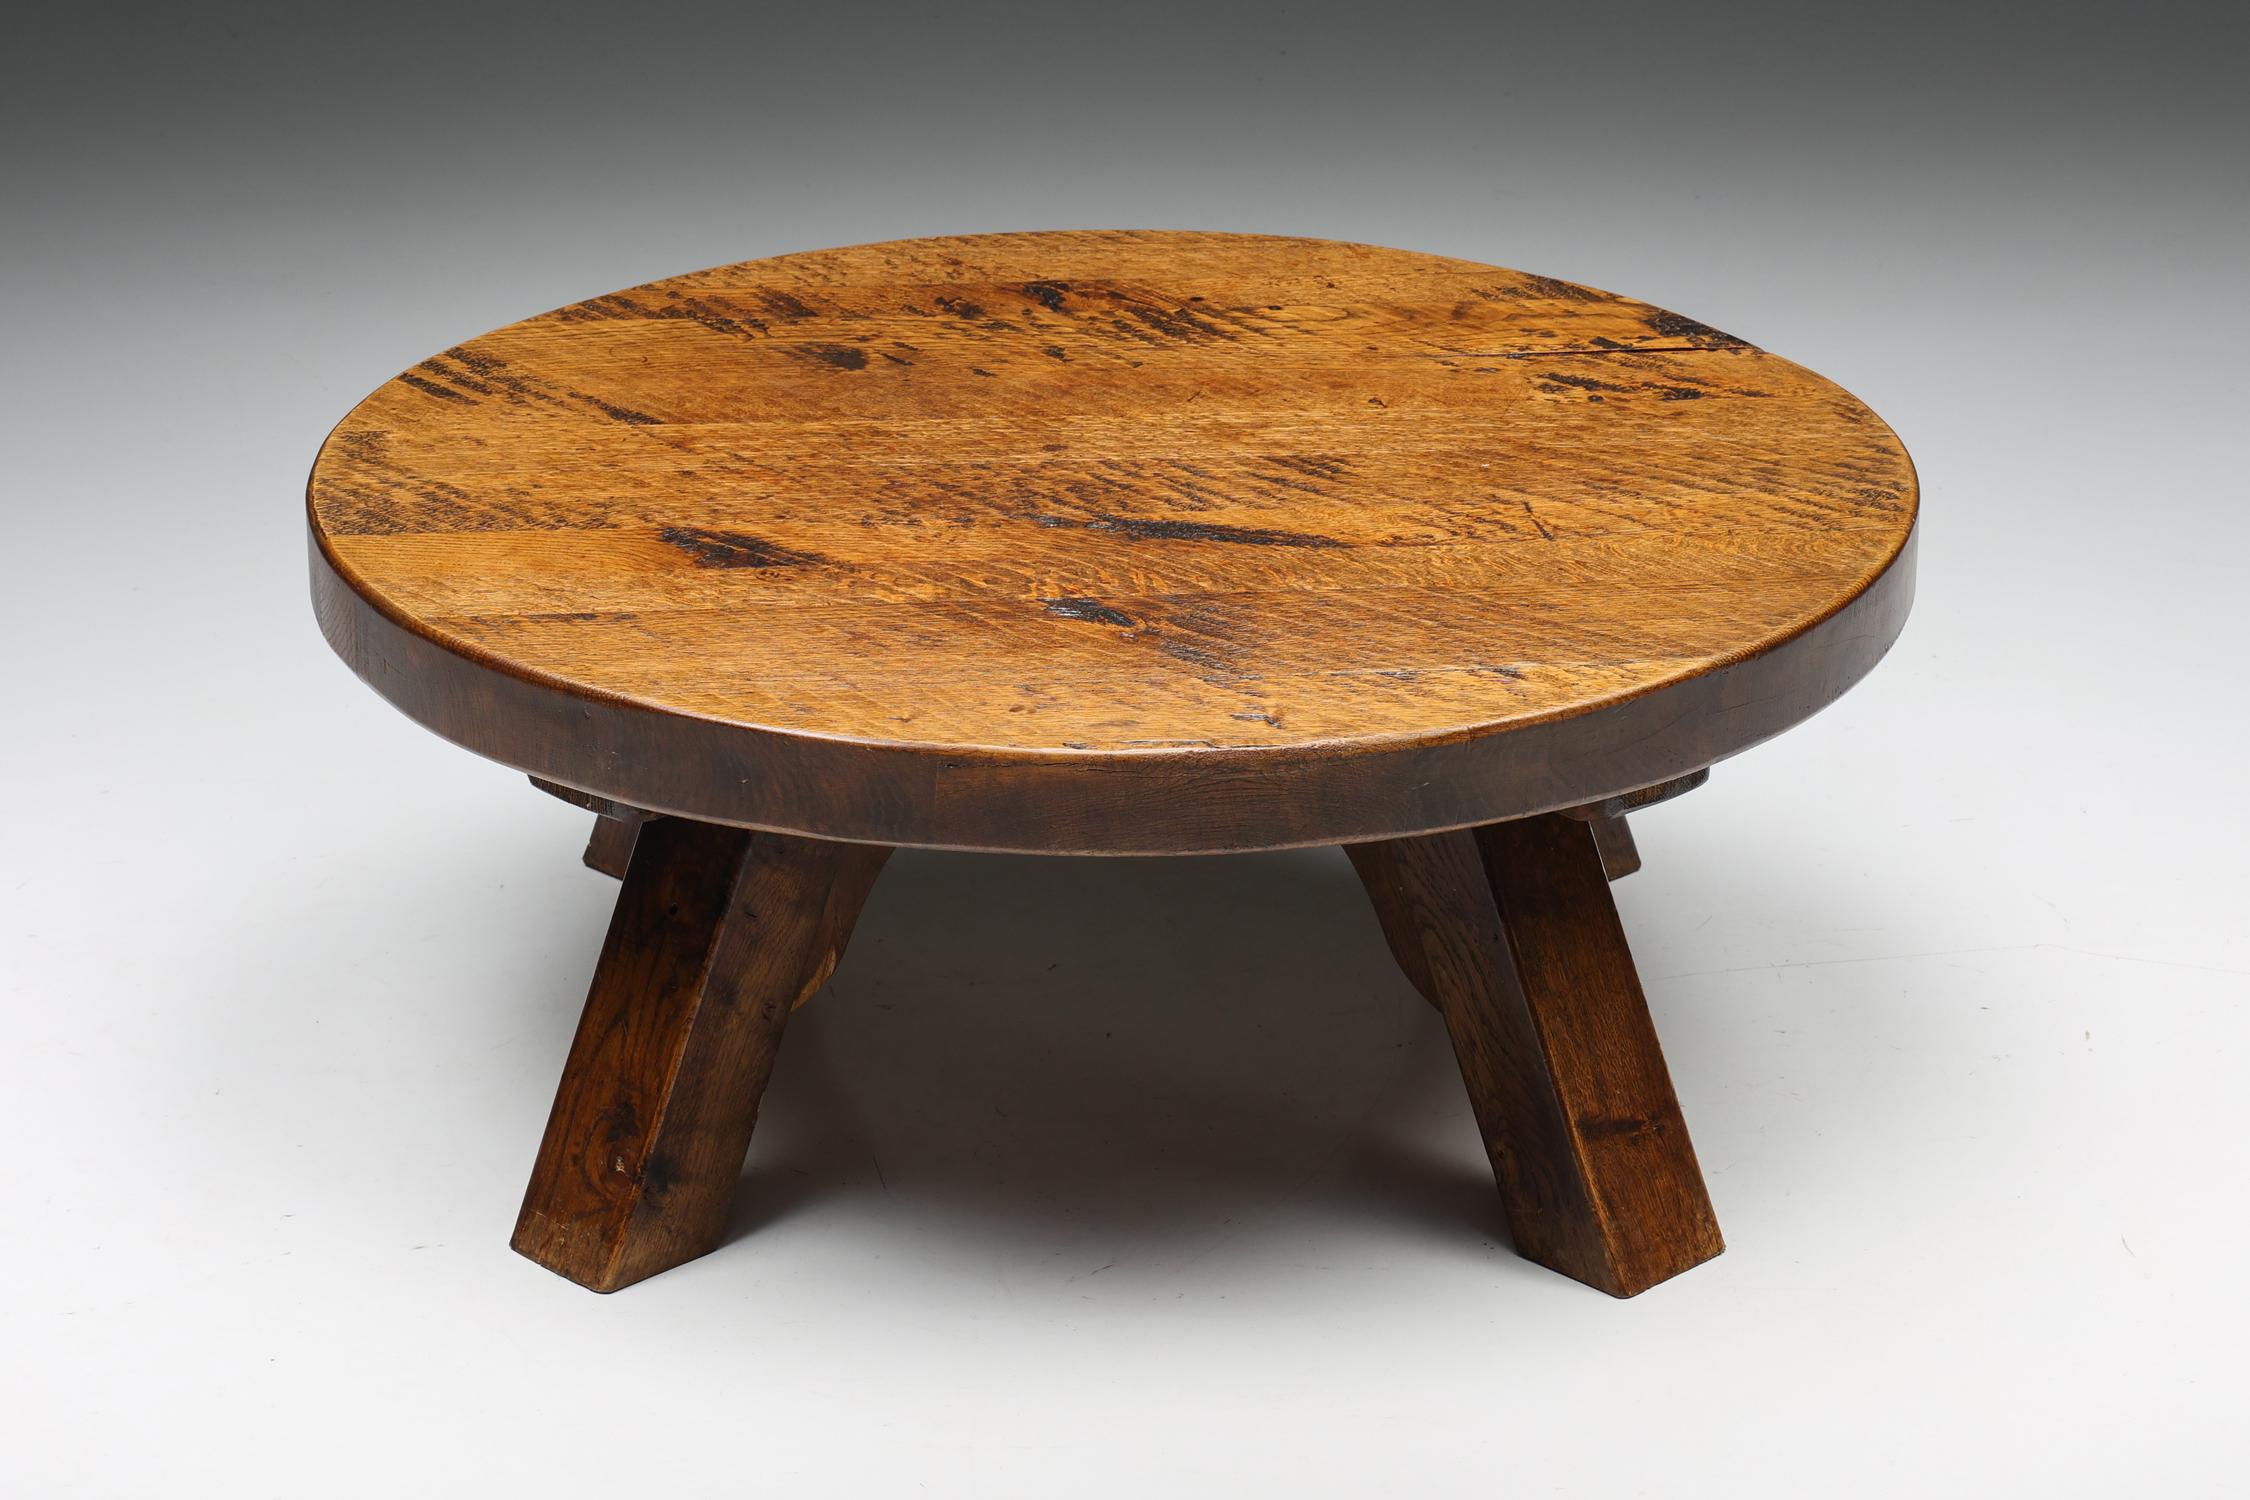 Round Wabi-Sabi rustic coffee table, France, Craftsmanship, 1950's

Rustic round coffee table with a four-legged base. The rounded top makes space for objects like magazines and other curiosities. Can also be used as a side table. This table has